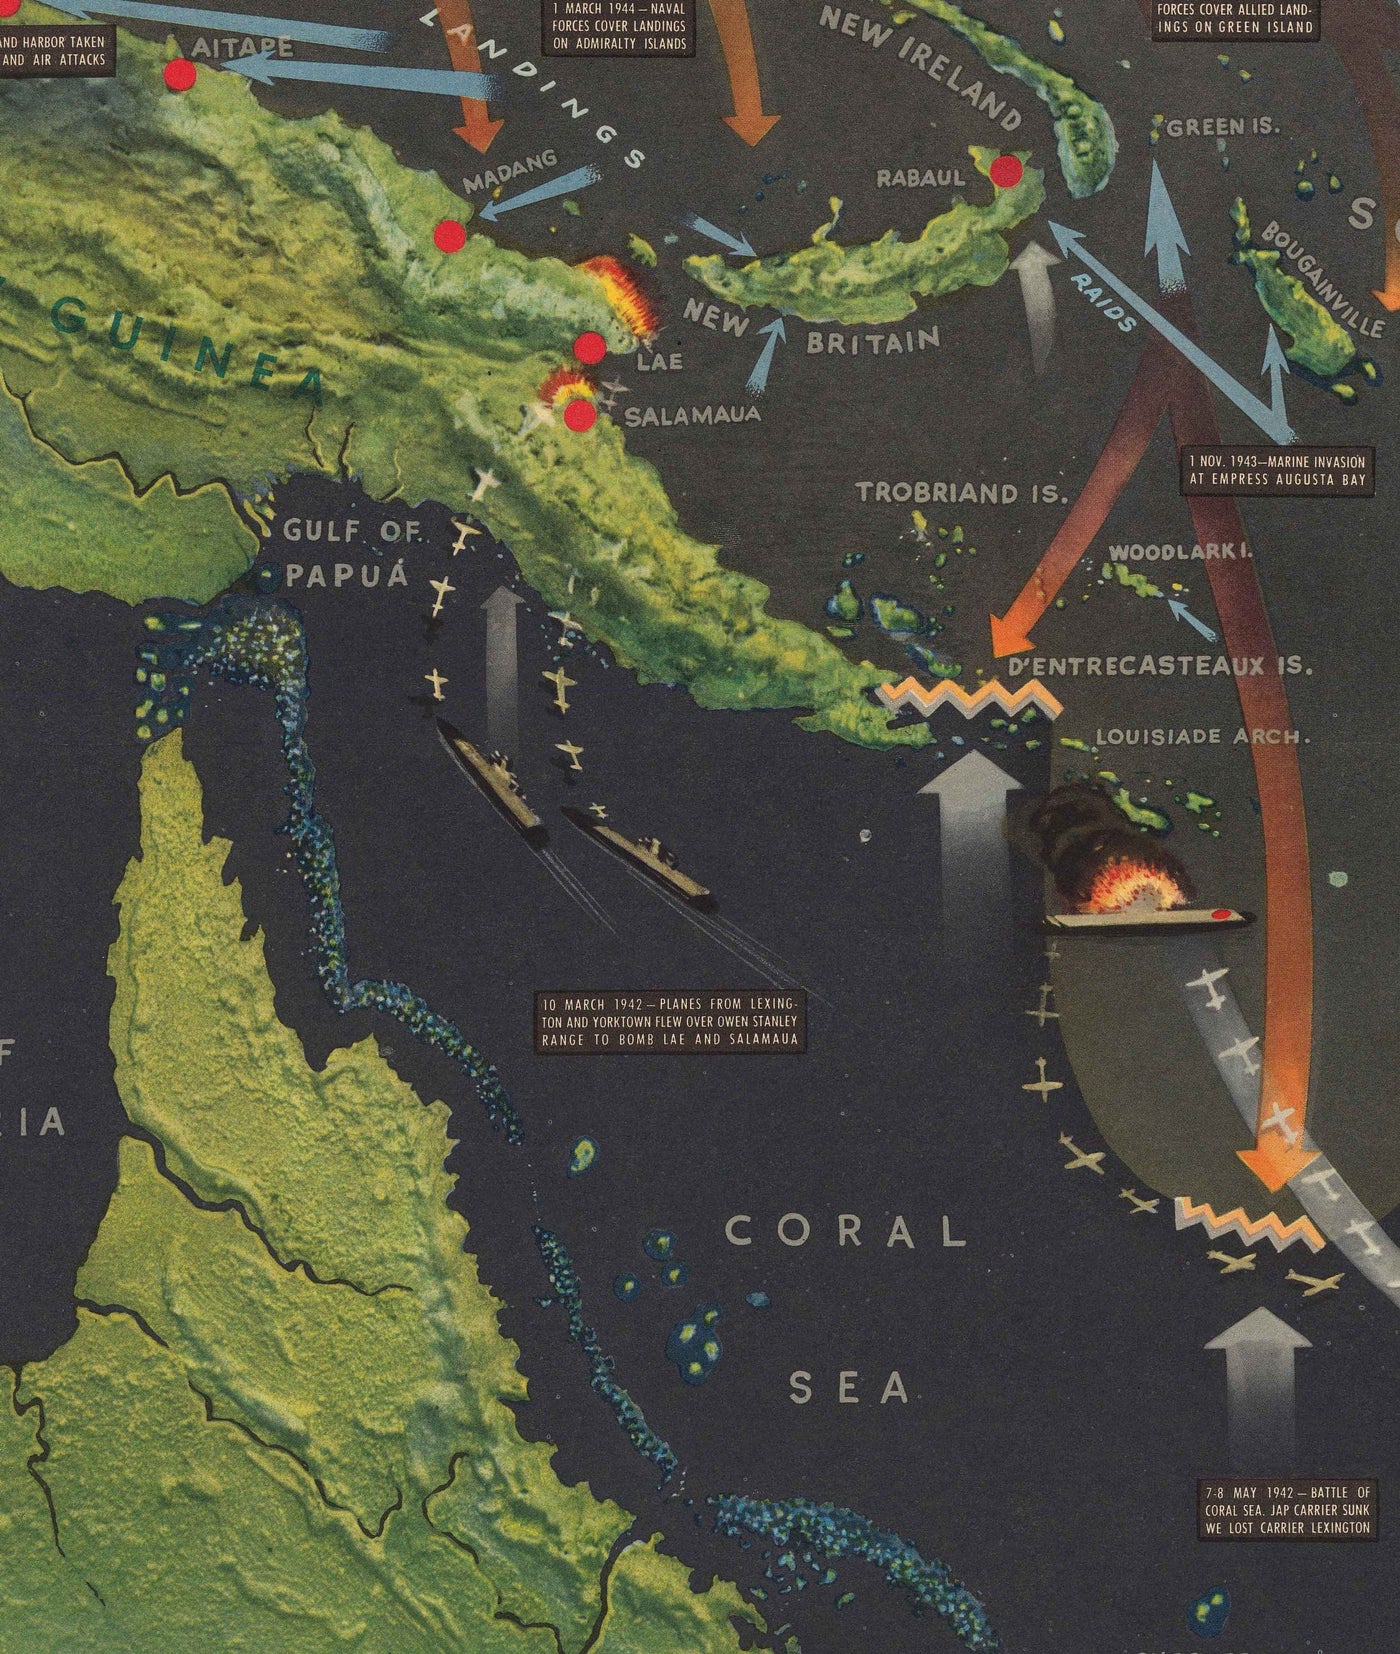 Old World War 2 Map: South West Pacific, 1944 - NavWarMap No. 5 - Australia, New Guinea, Indonesia Philippines, Islands